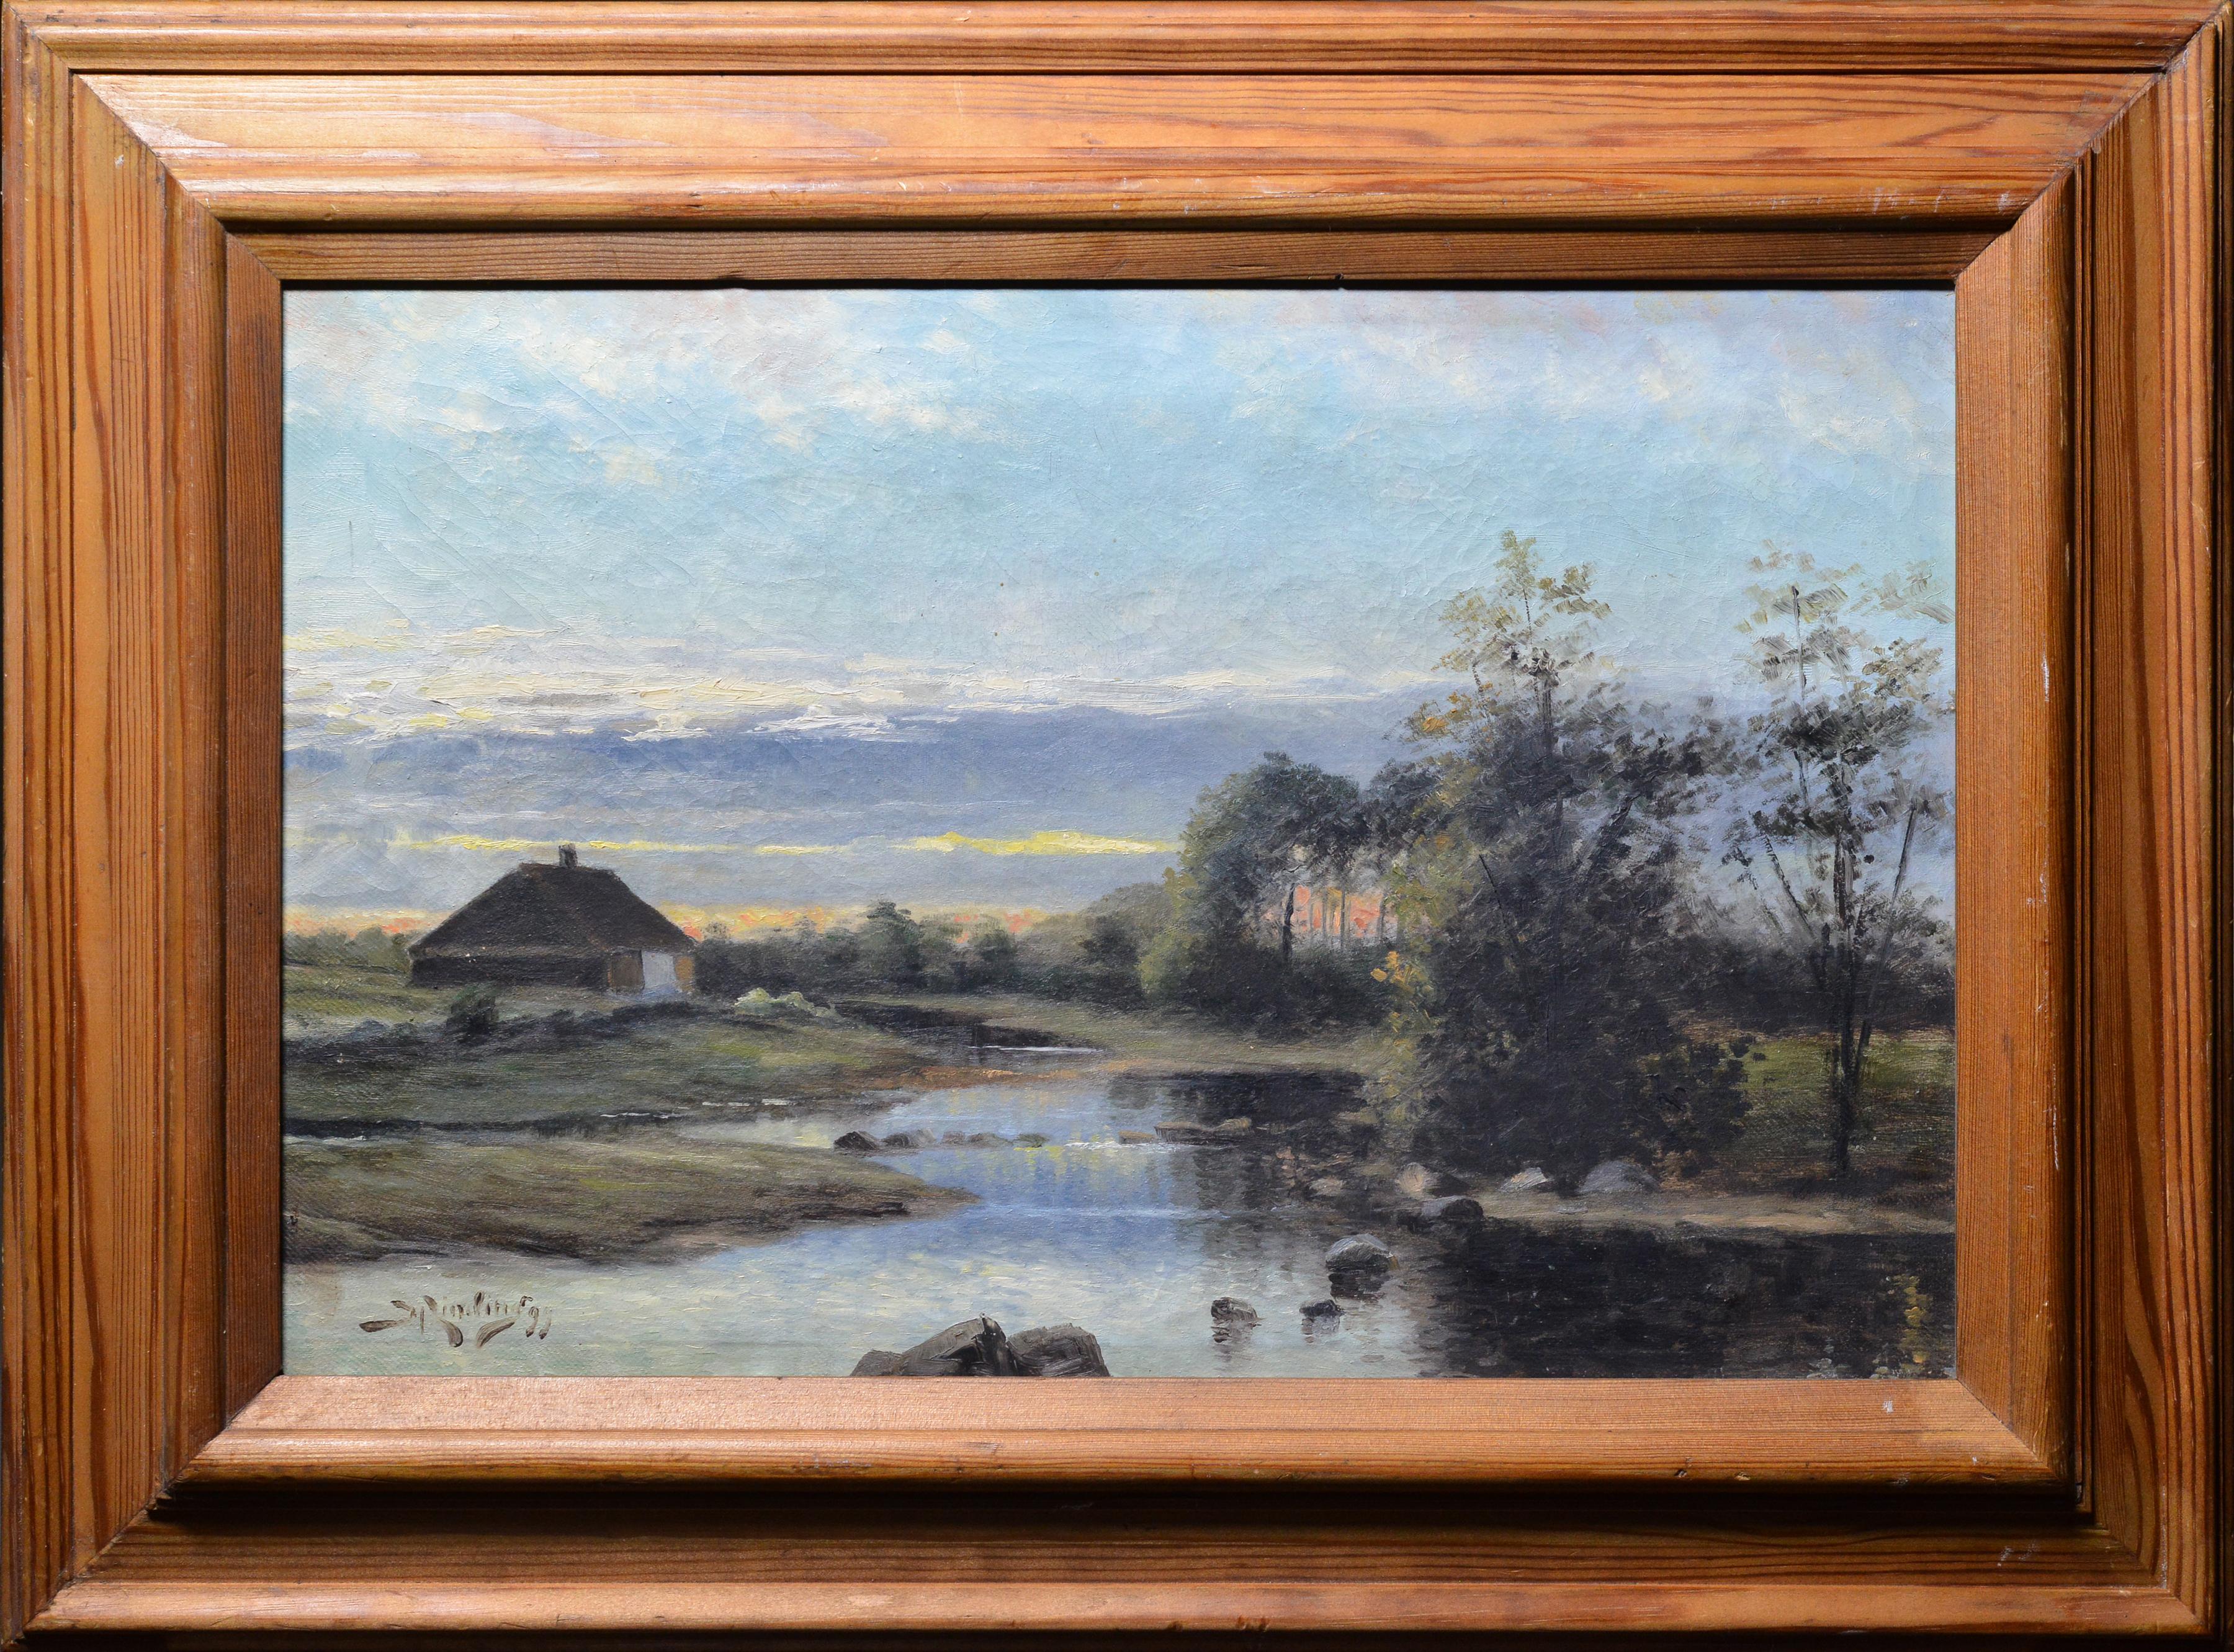 Unknown Landscape Painting - Evening Twilight on River 1899 Scandinavian Oil Painting on Canvas Signed Framed